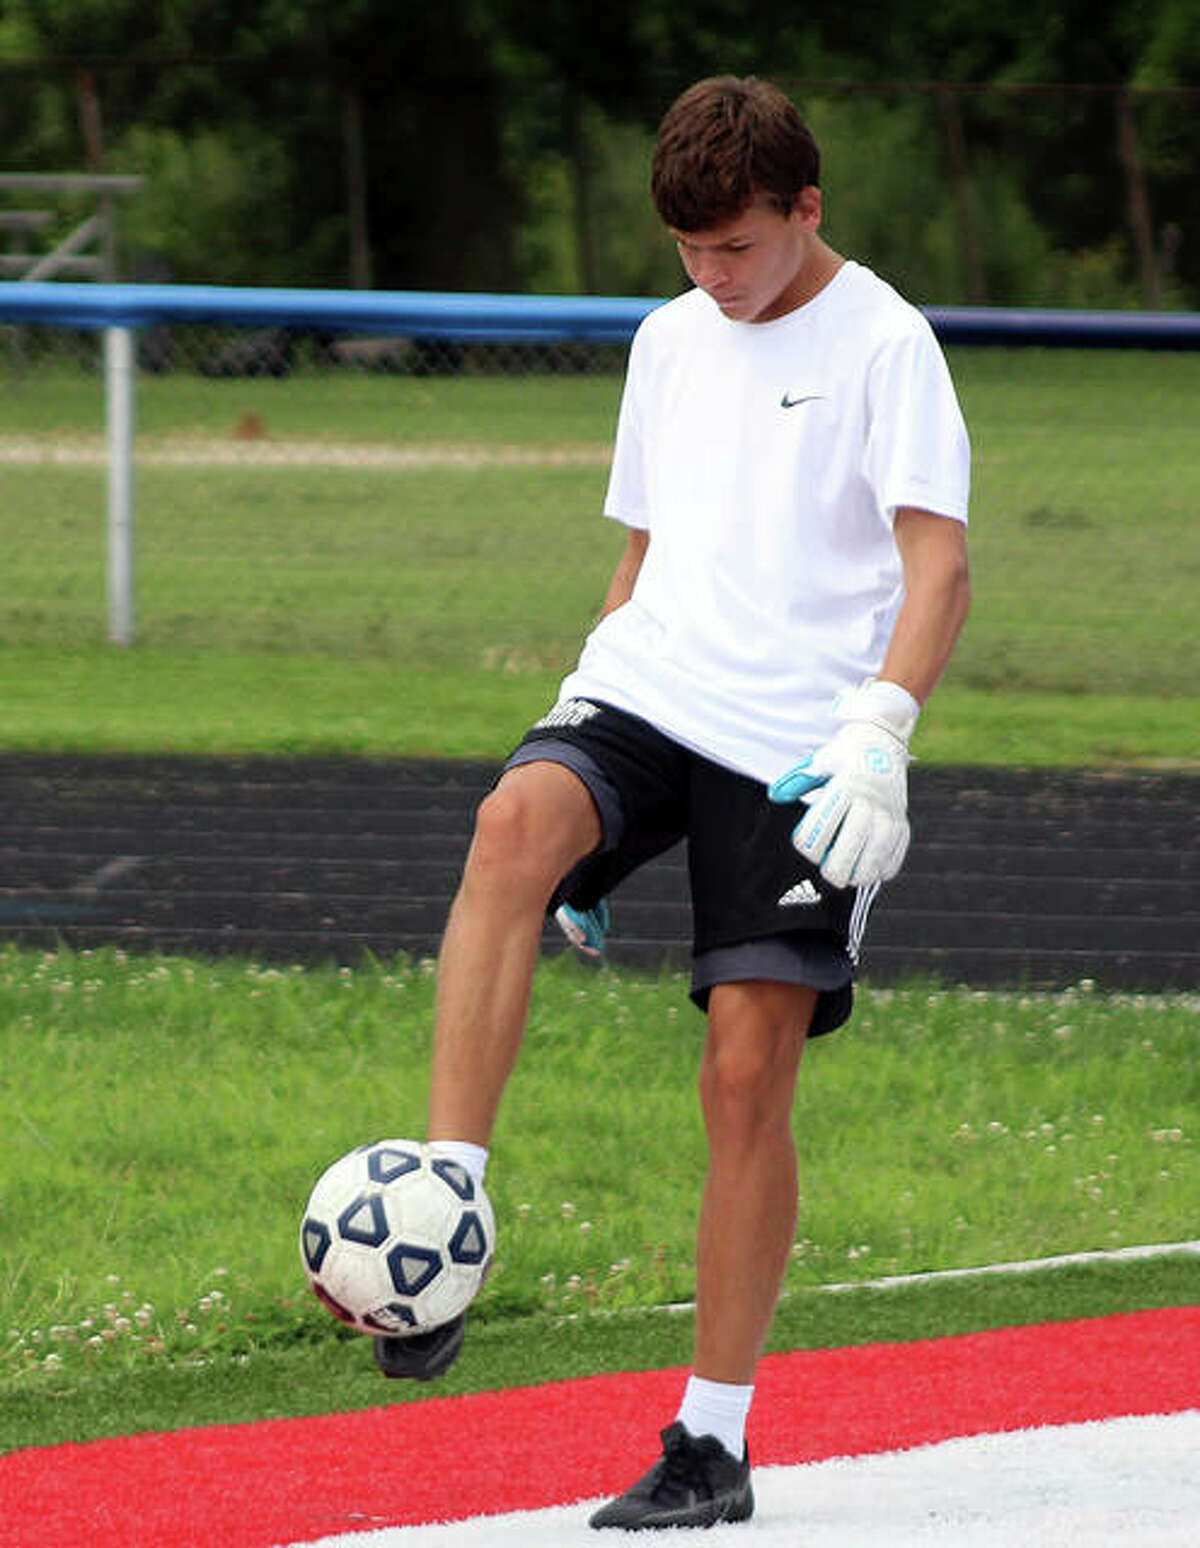 Carlinville’s Will Meyer, shown here during a soccer practice session, was one of four Cavies who ran in the South Central Conference meet Saturday at Southwestern, then made it to Raymond in time for the championship game of the Lincolnwood Class 1A Soccer Regional Tourney later that morning. Meyer finished second in the SCC Cross Country Meet at Southwestern. Then he and teammates Matt Dunn, Tyler Summers and Jack Rives and helped their soccer team to a 3-1 regional championship win over host Lincolnwood.